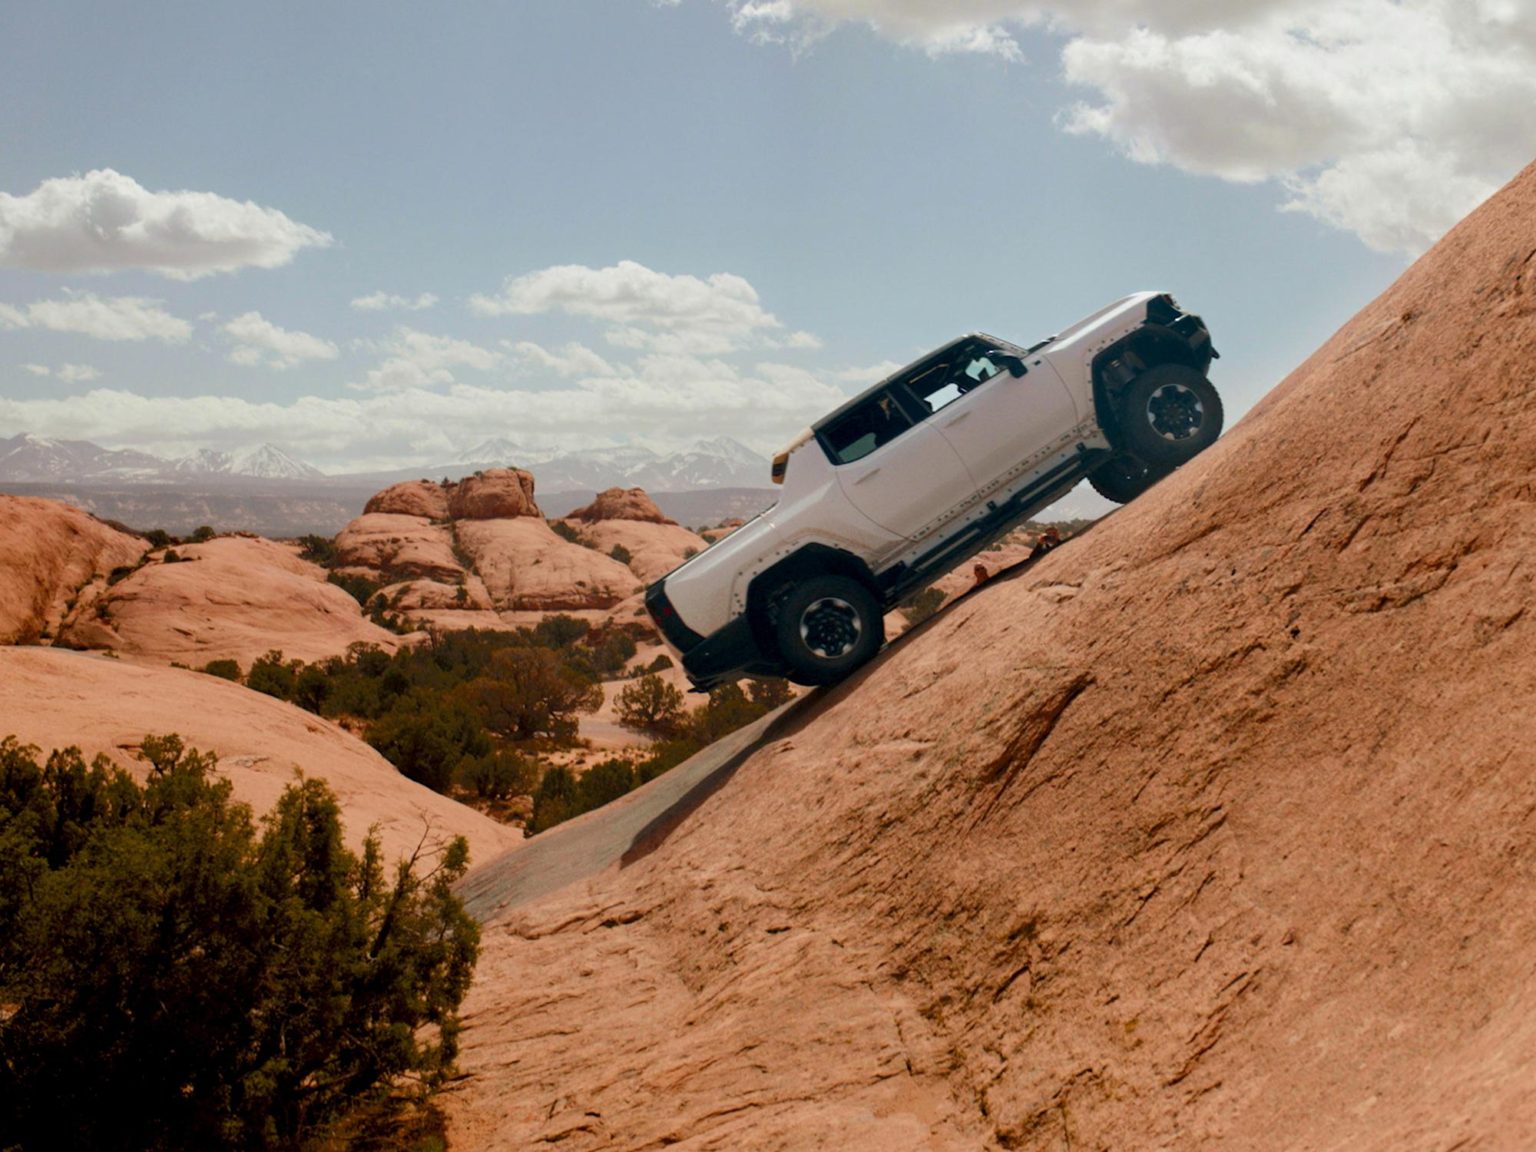 The GMC Hummer EV is in Moab, Utah testing its technology.